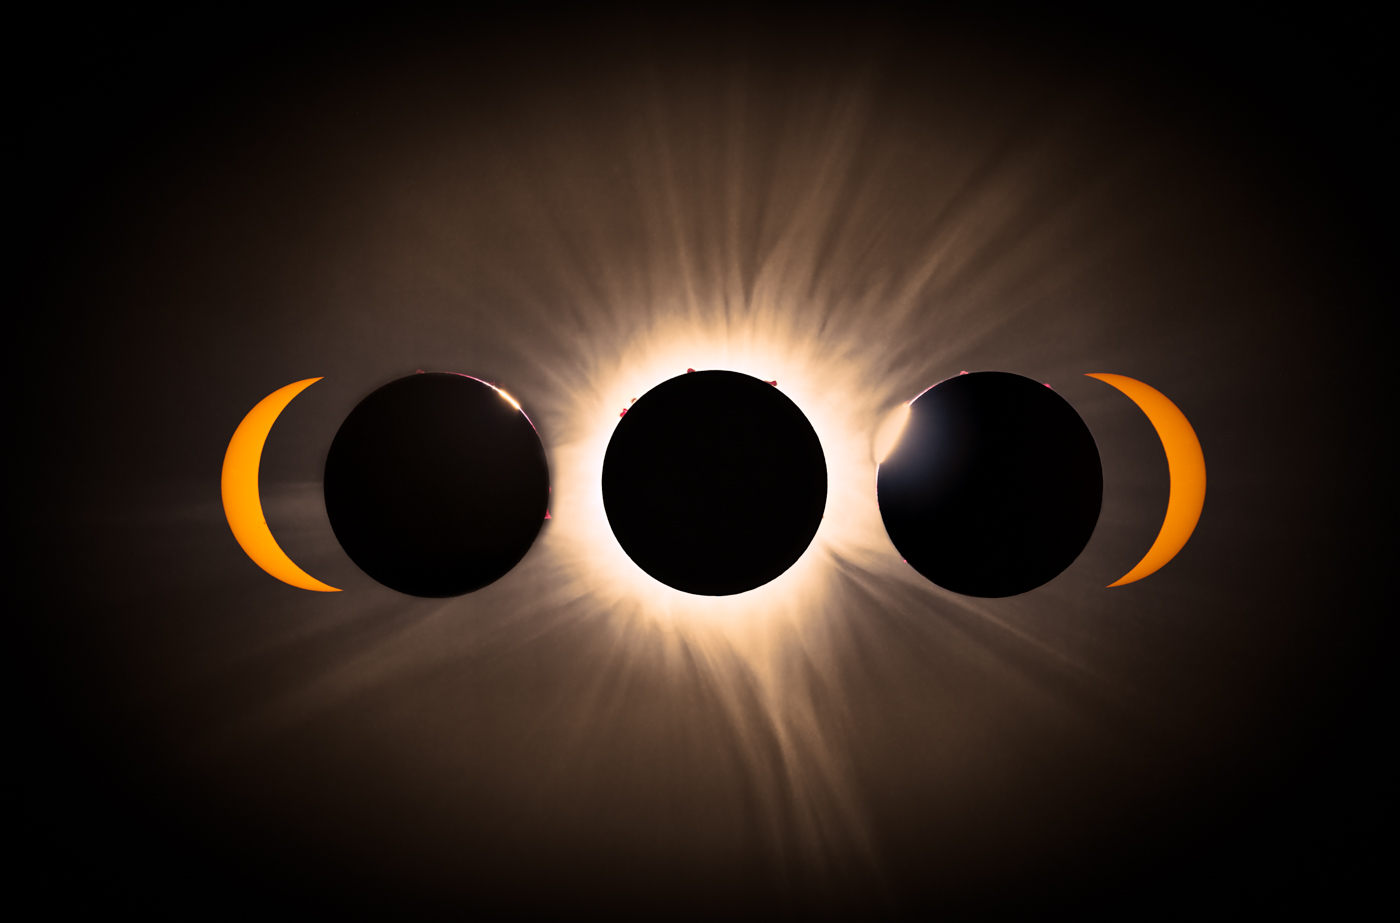 a series of eclipse images from partial eclipse to totality and then back to partial.